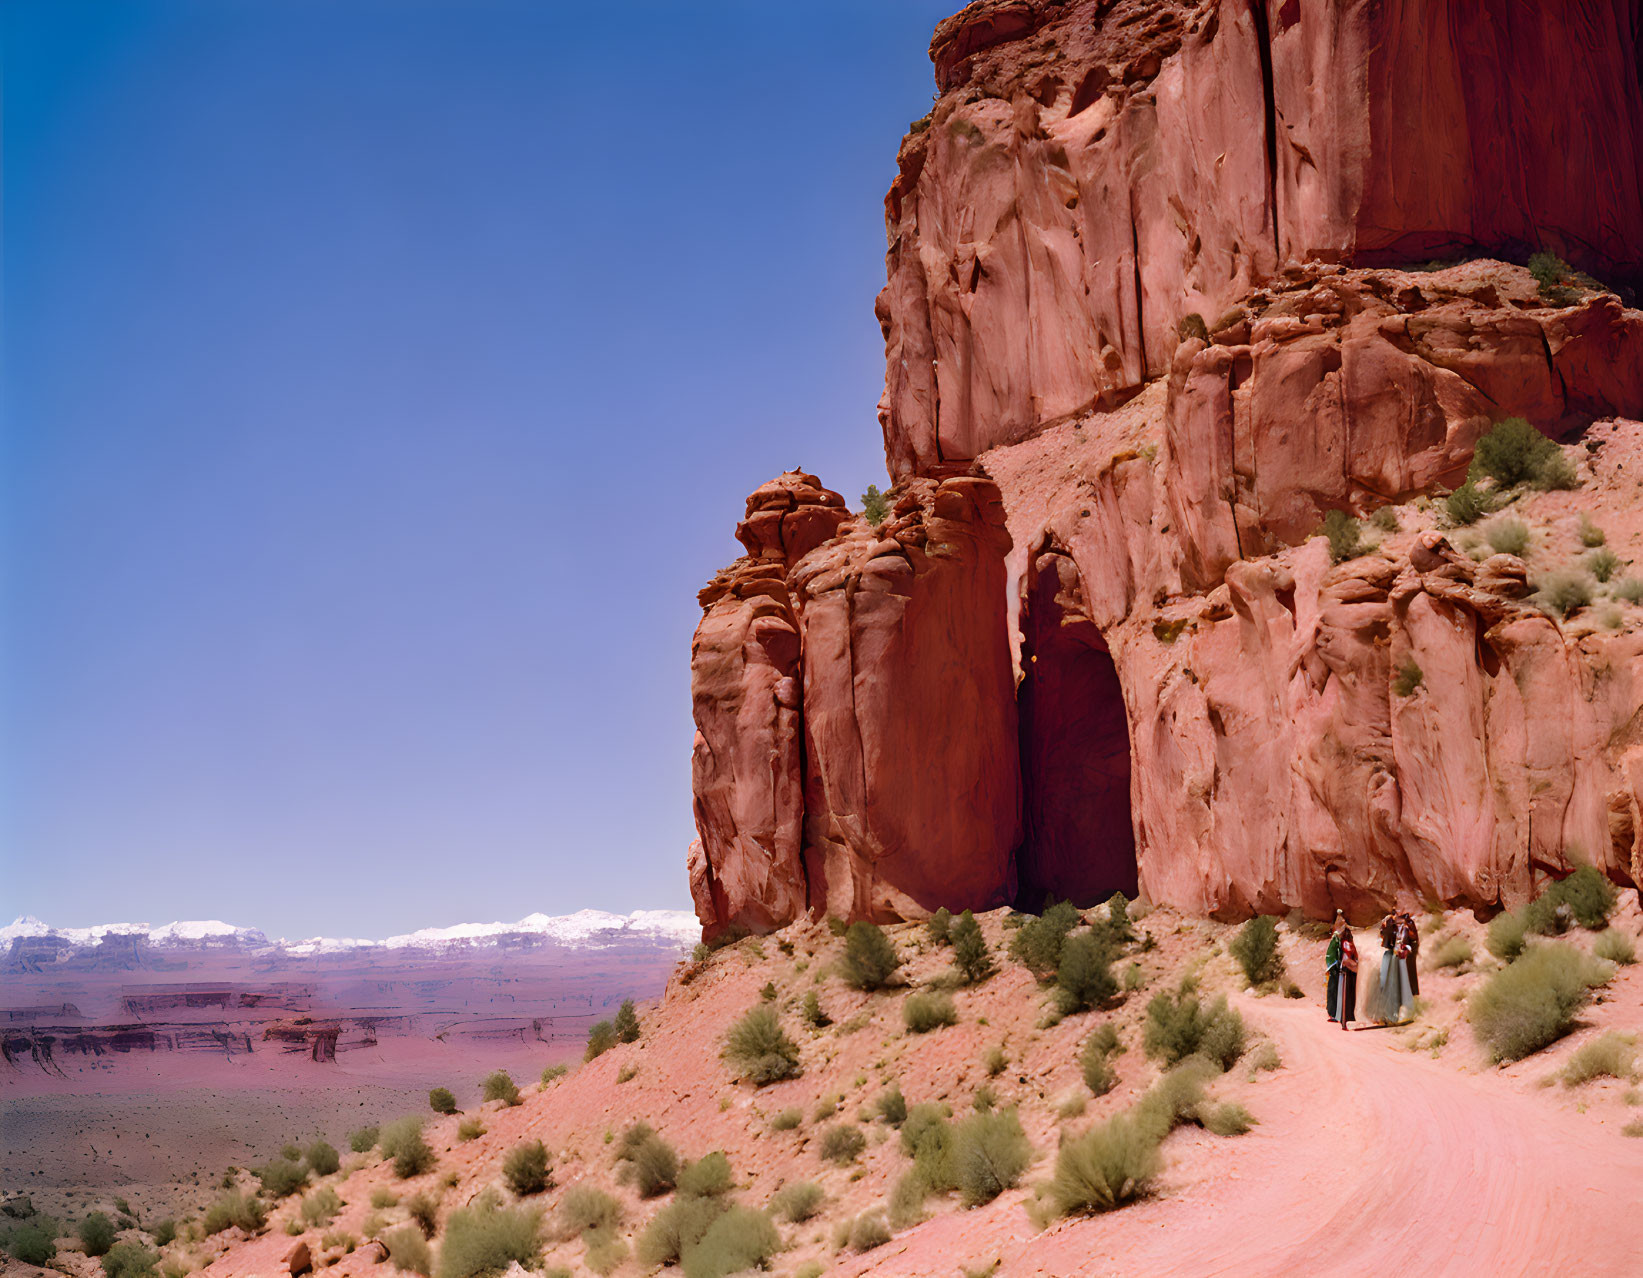 Red dirt path by towering red rock cliffs with distant snow-capped mountains and two people walking